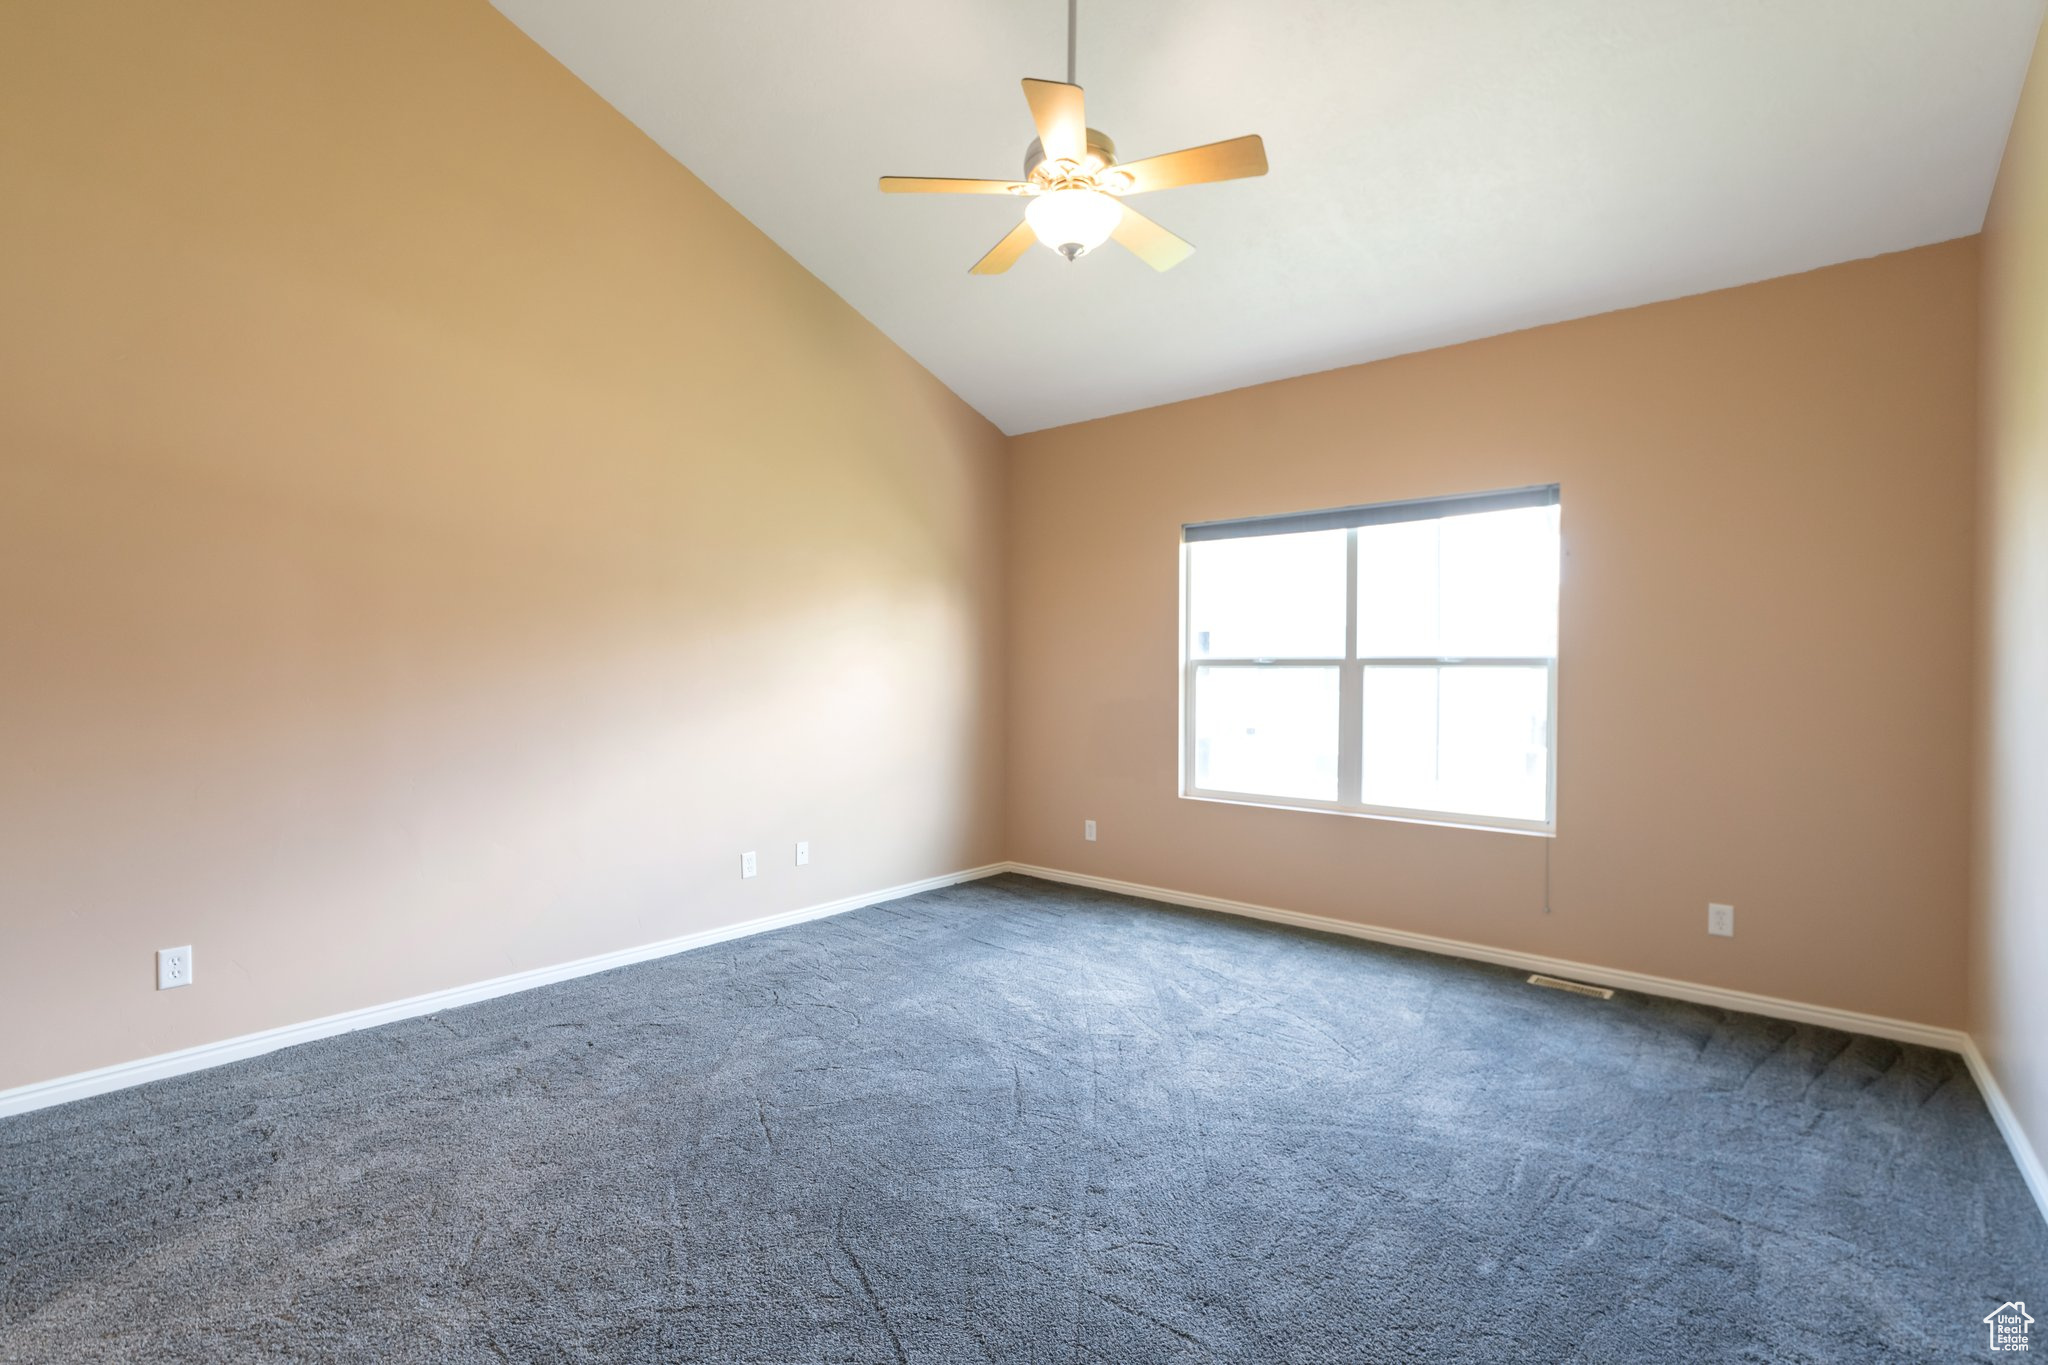 Primary Bedroom featuring high vaulted ceiling, ceiling fan, and dark carpet